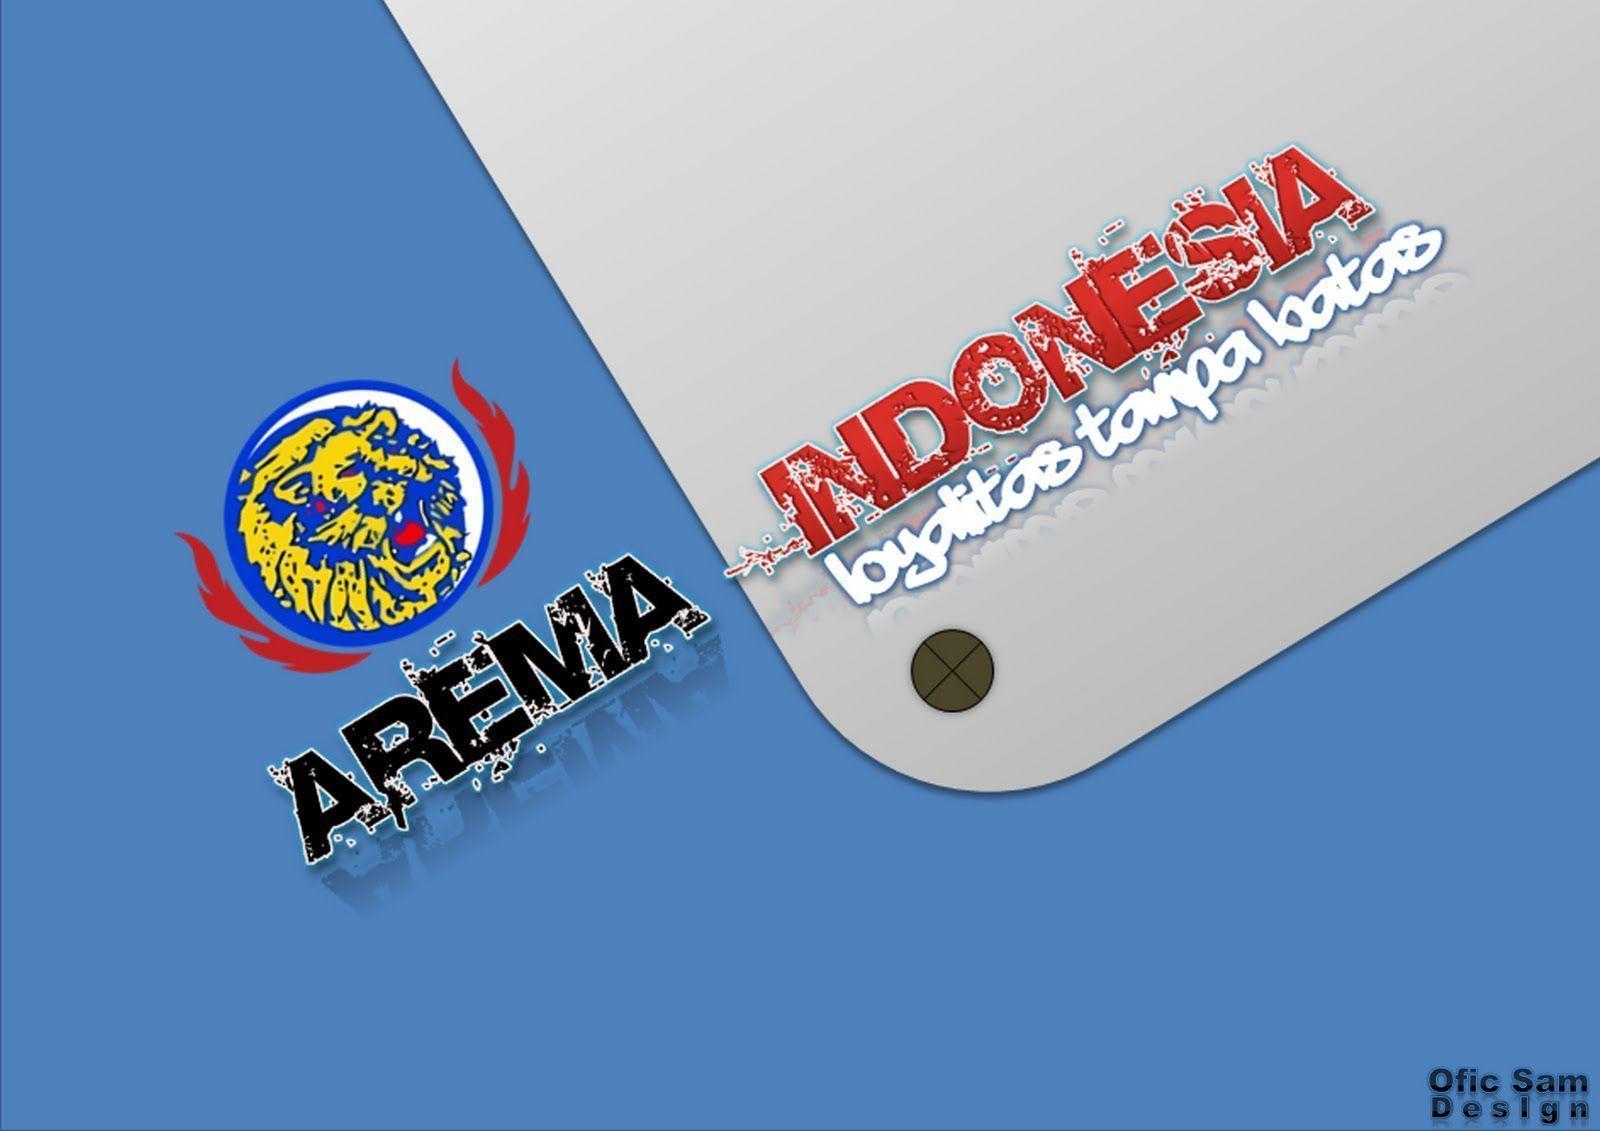 Arema Wallpapers Wallpaper Cave